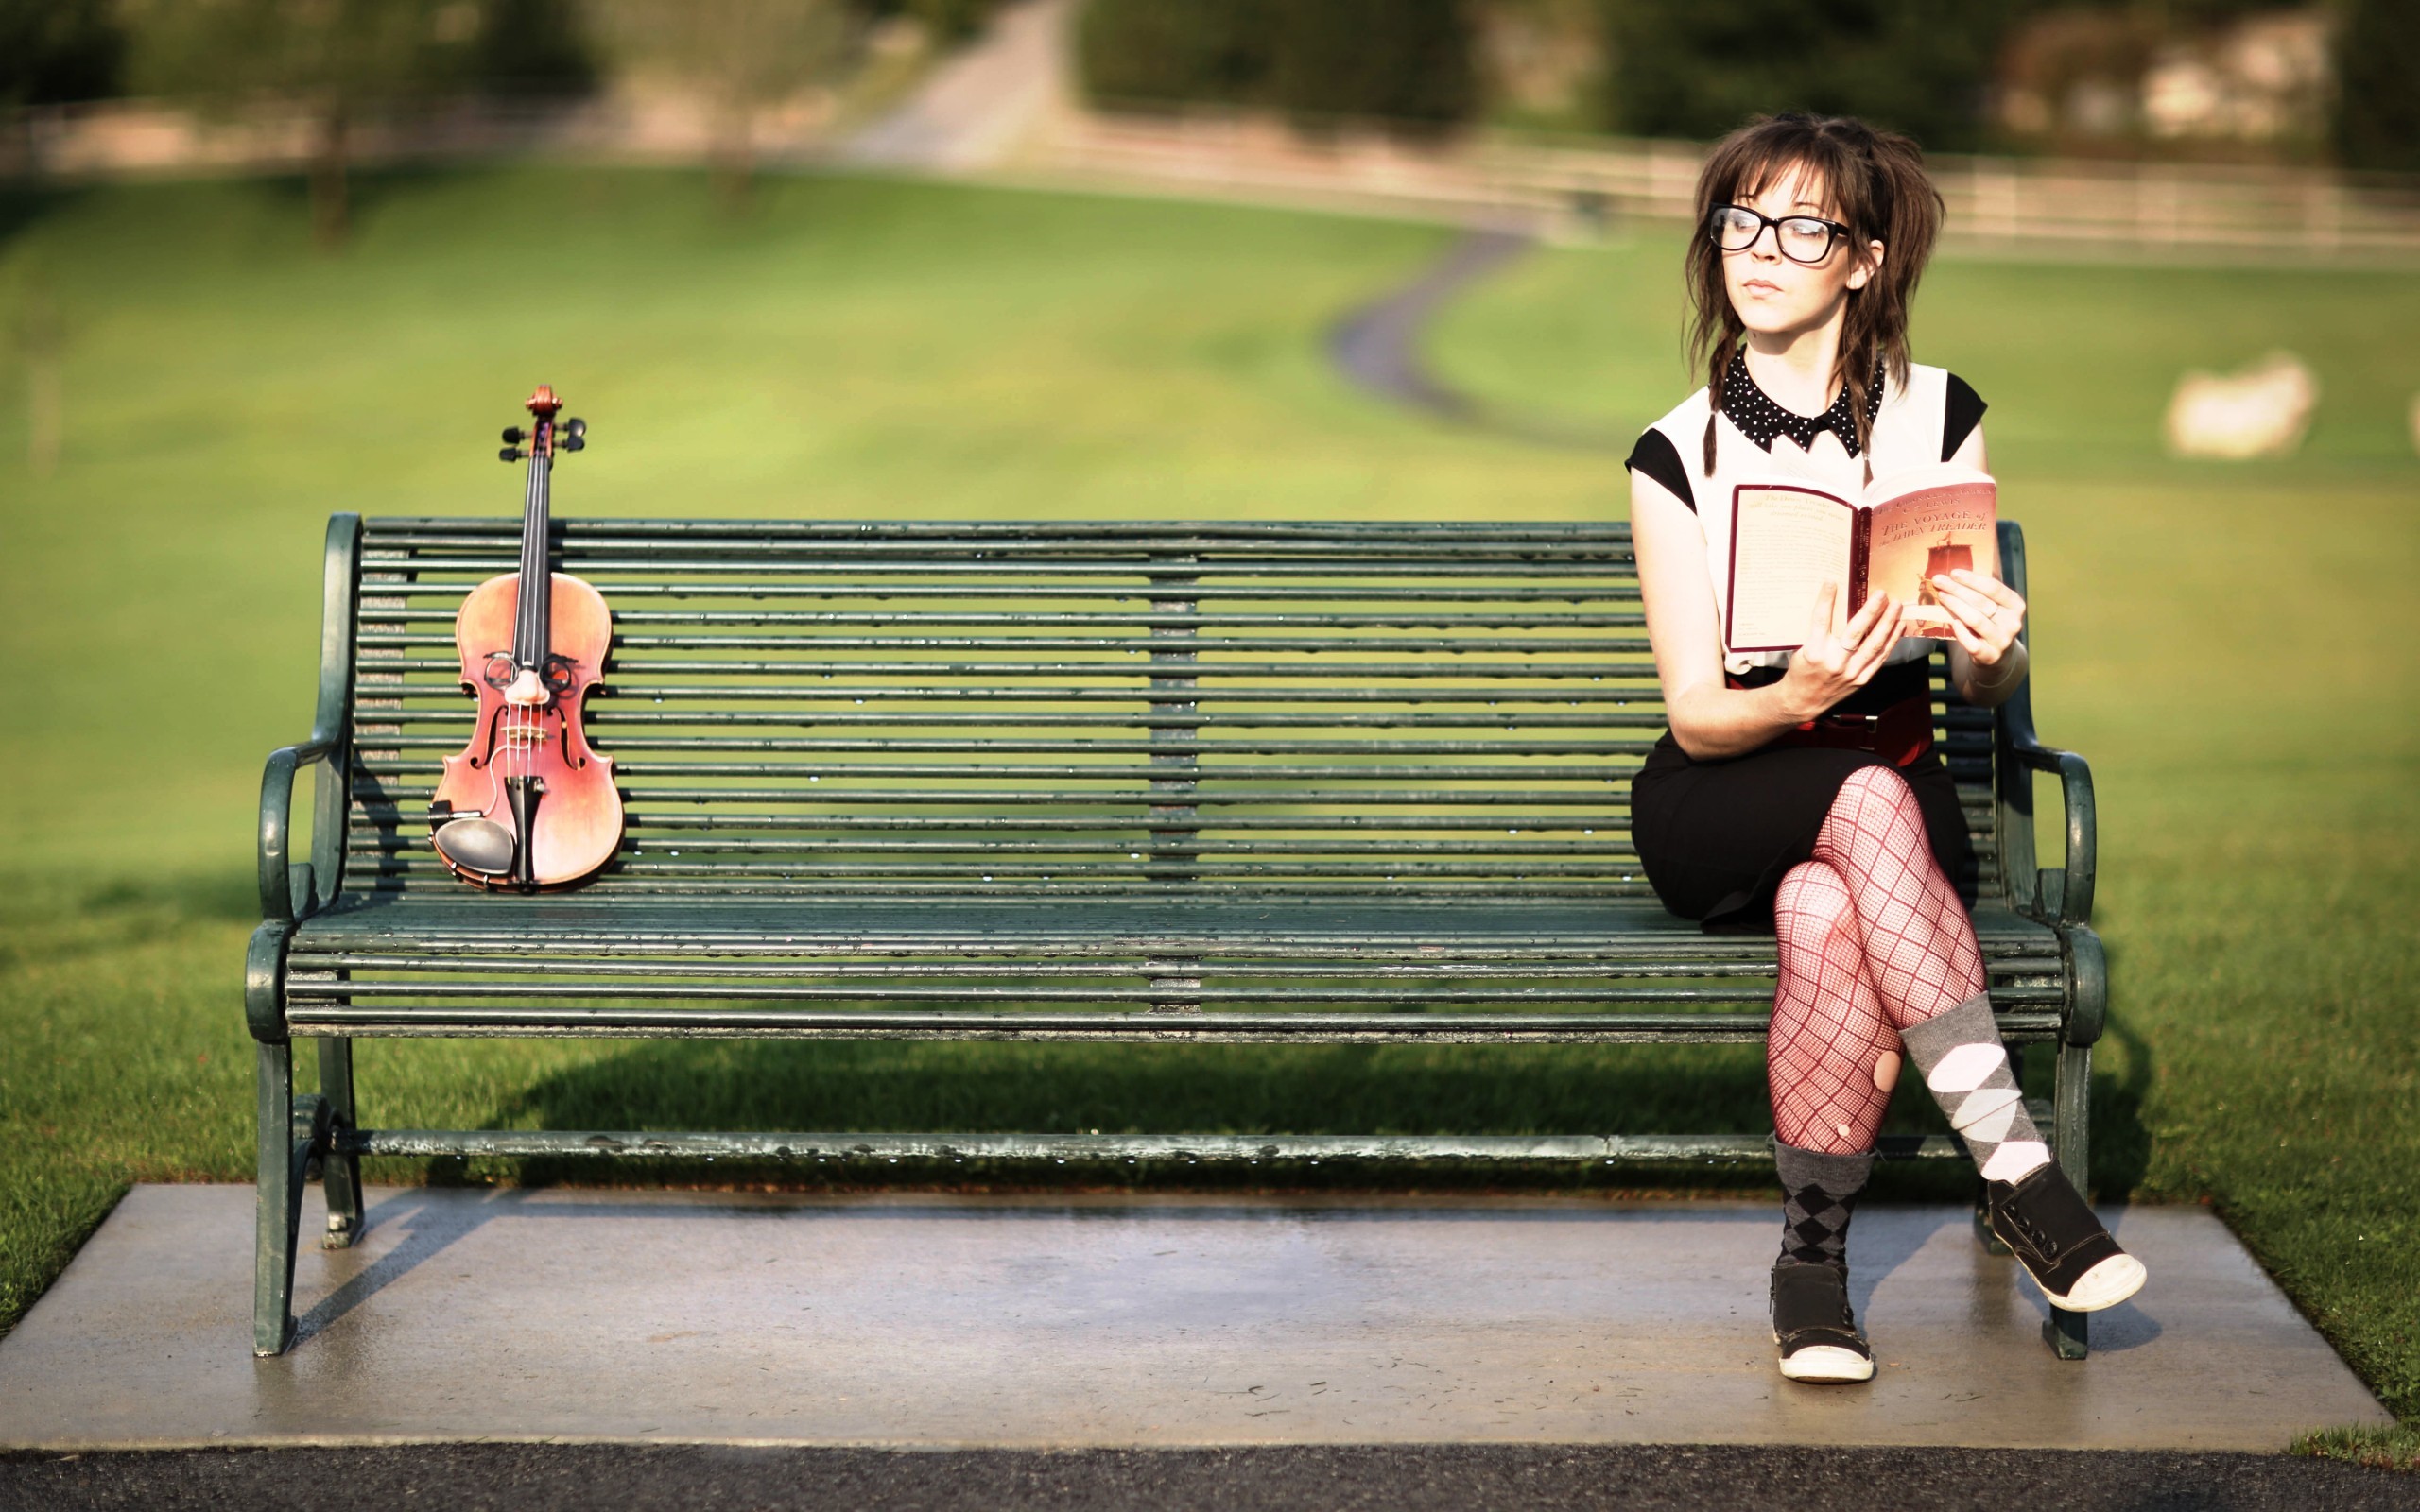 People 2560x1600 Lindsey Stirling women violin glasses women with glasses stockings bench women outdoors books bangs depth of field musical instrument on bench